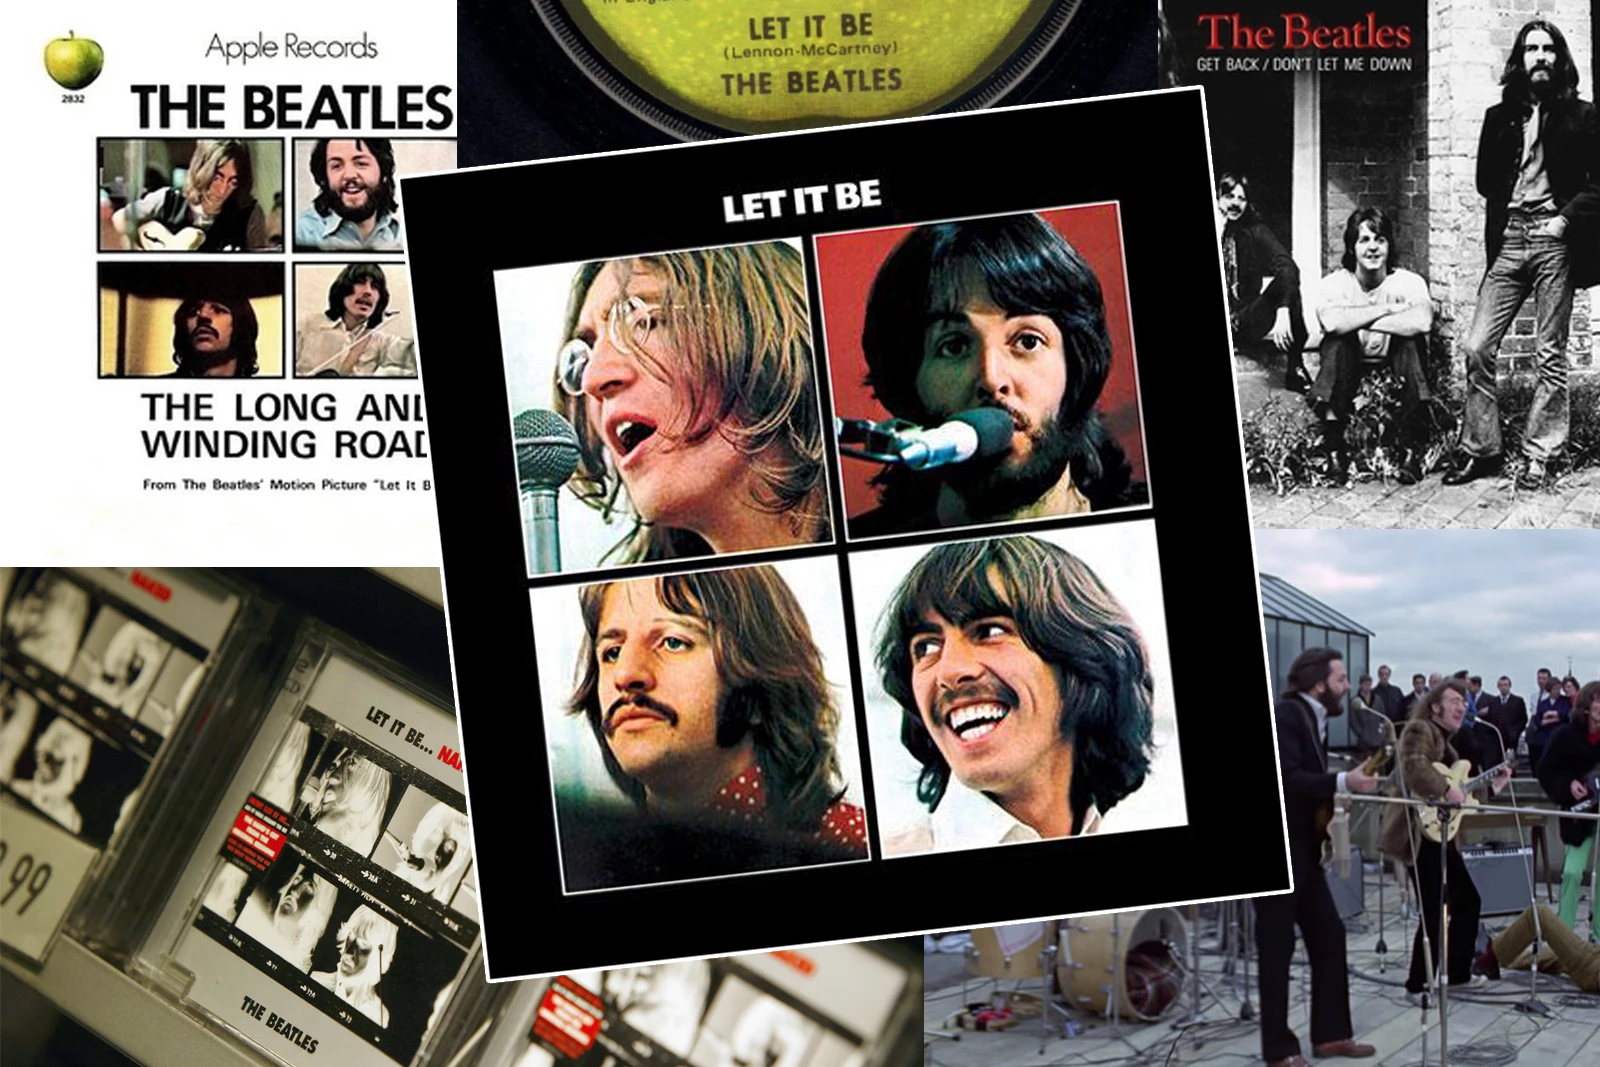 The Beatles Let it Be Photo Print 14 x 11" 